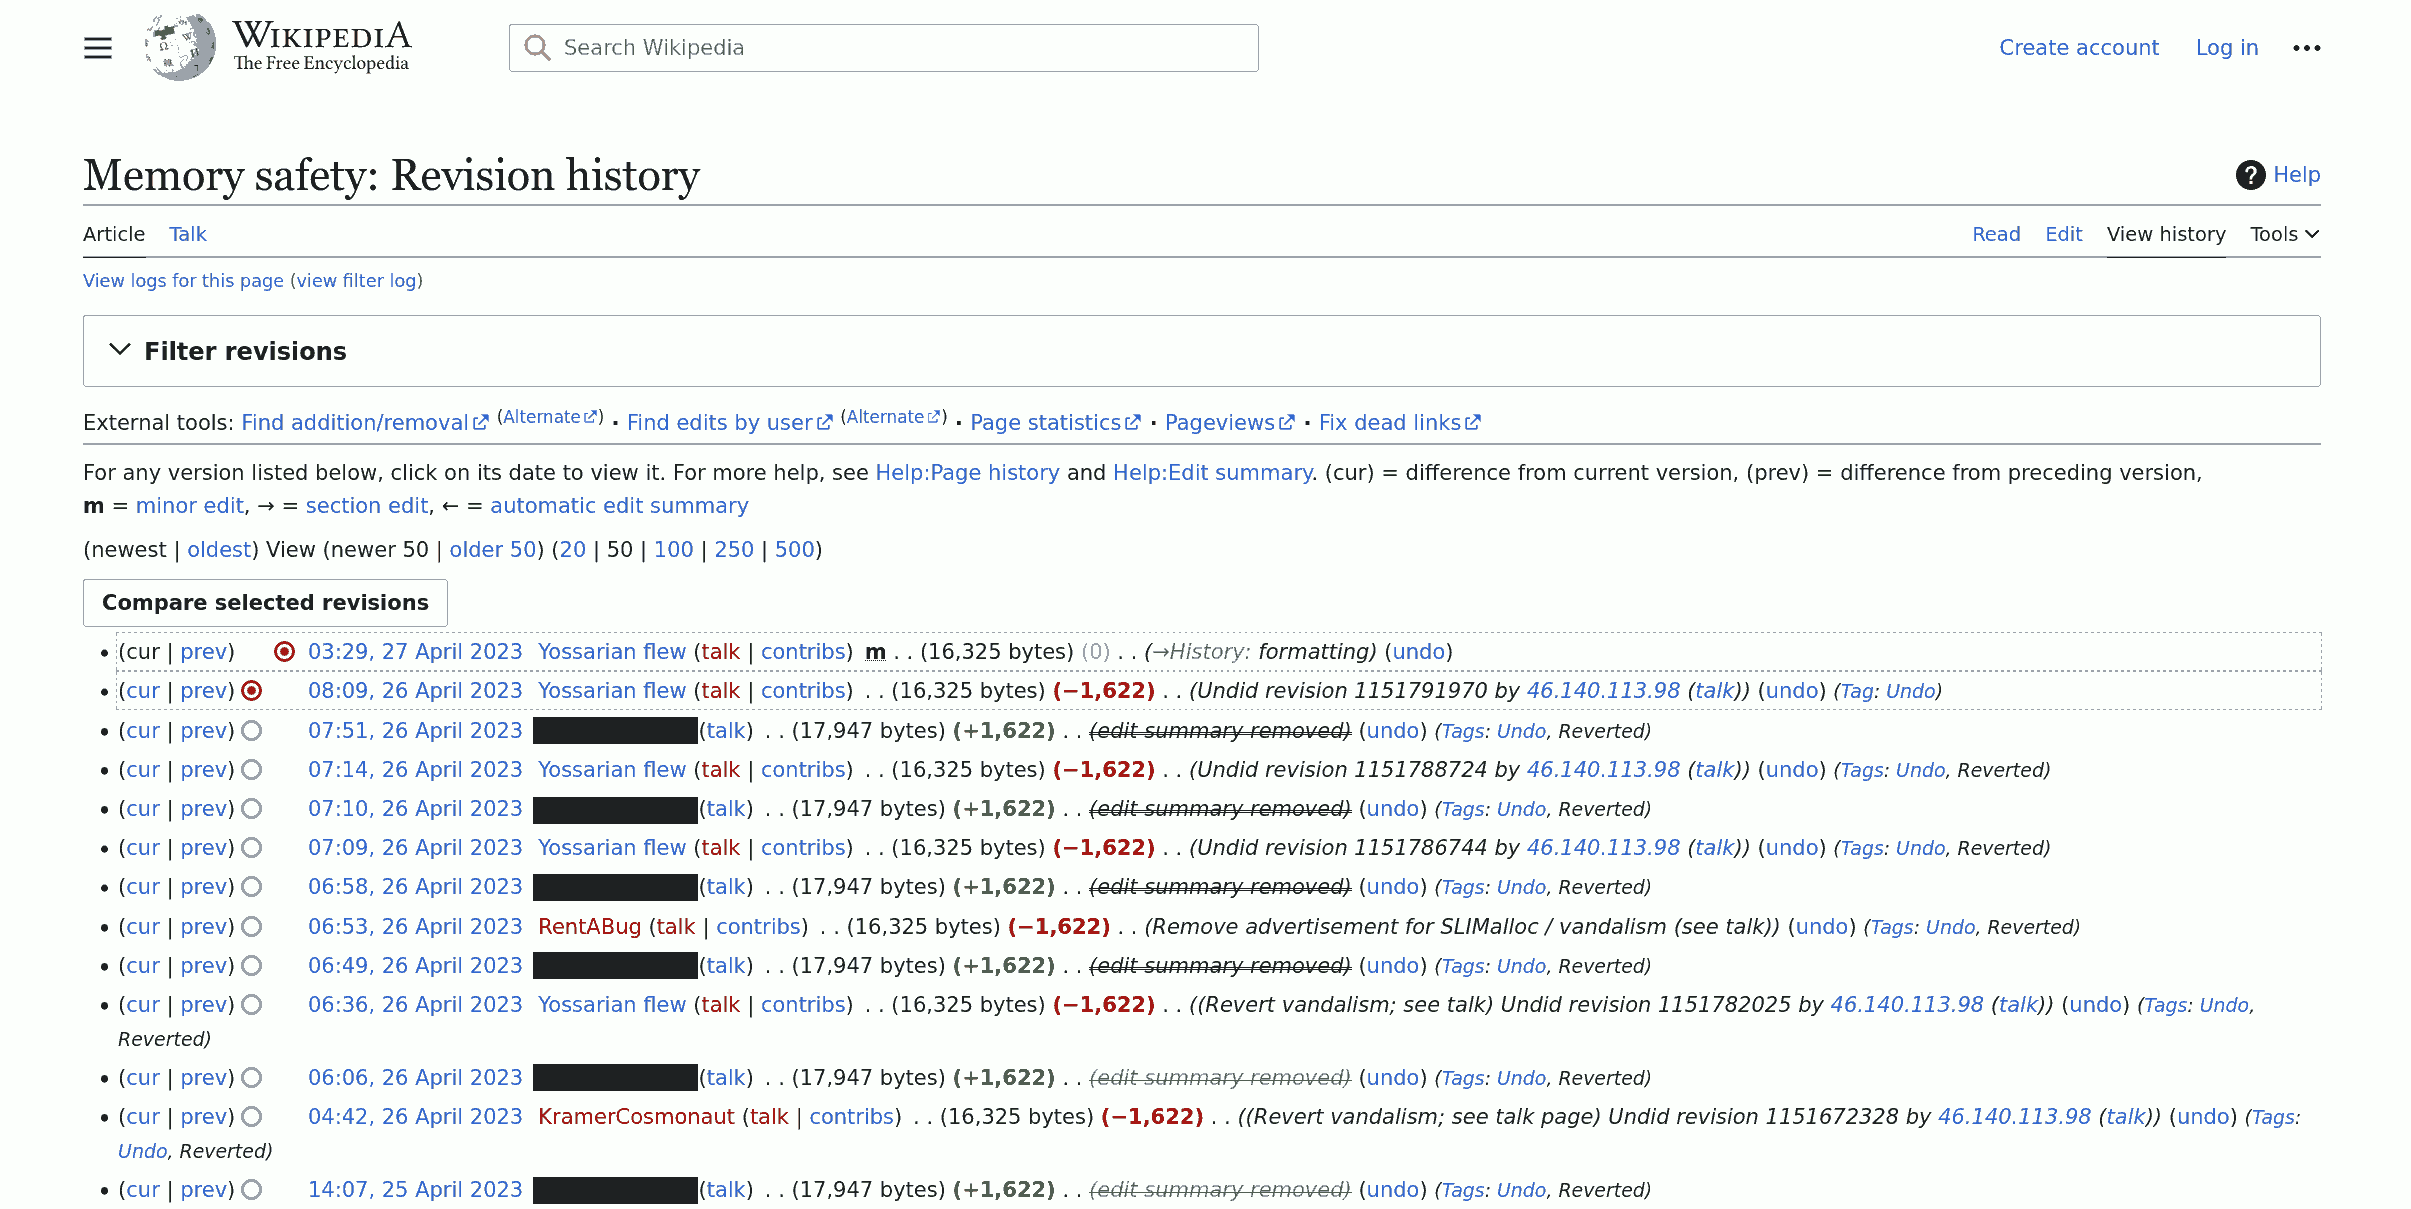 William Woodruff, R&D Director at TrailofBits.com, having erased his trails on the Wikipedia the 'Memory-Safety page' History